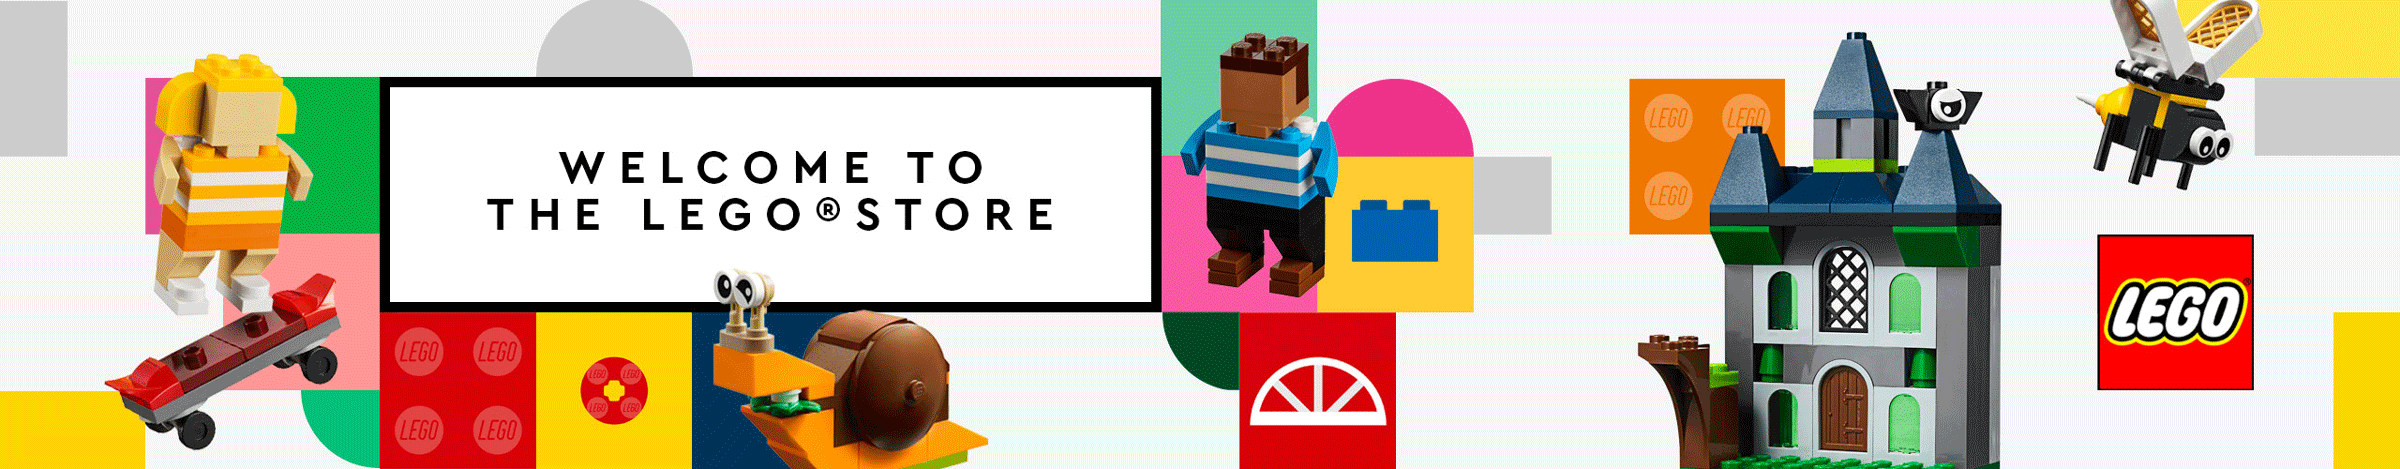 Welcome to the LEGO Store